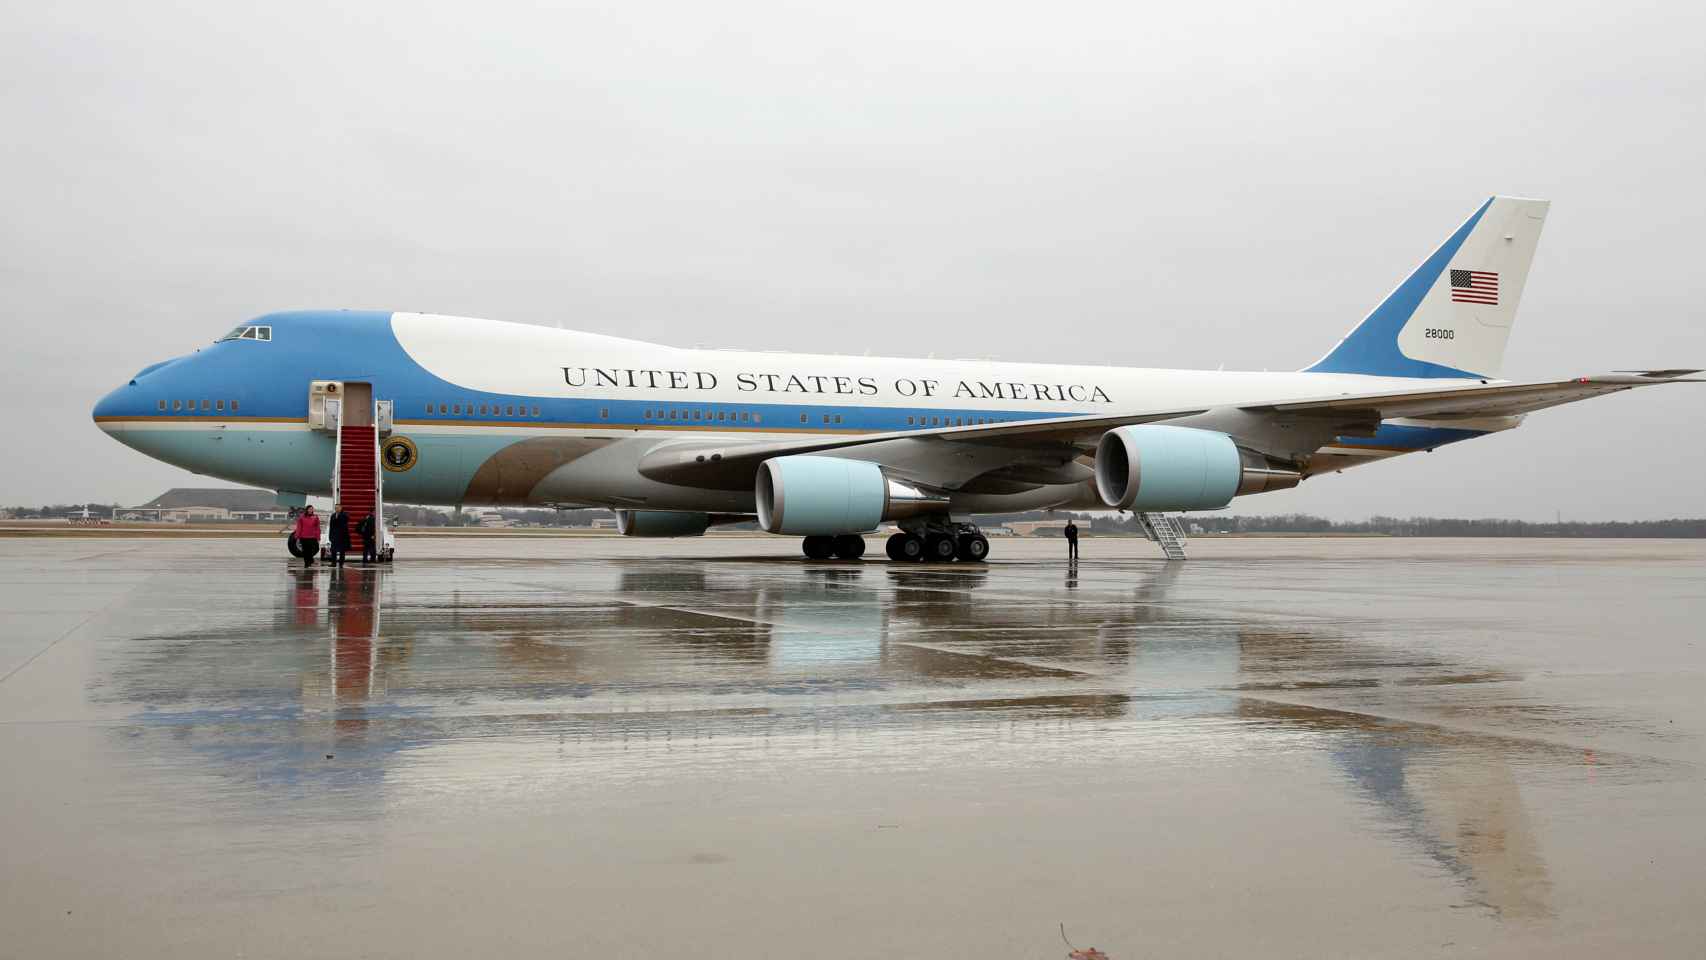 AIr Force One at Joint Base Andrews in Washington